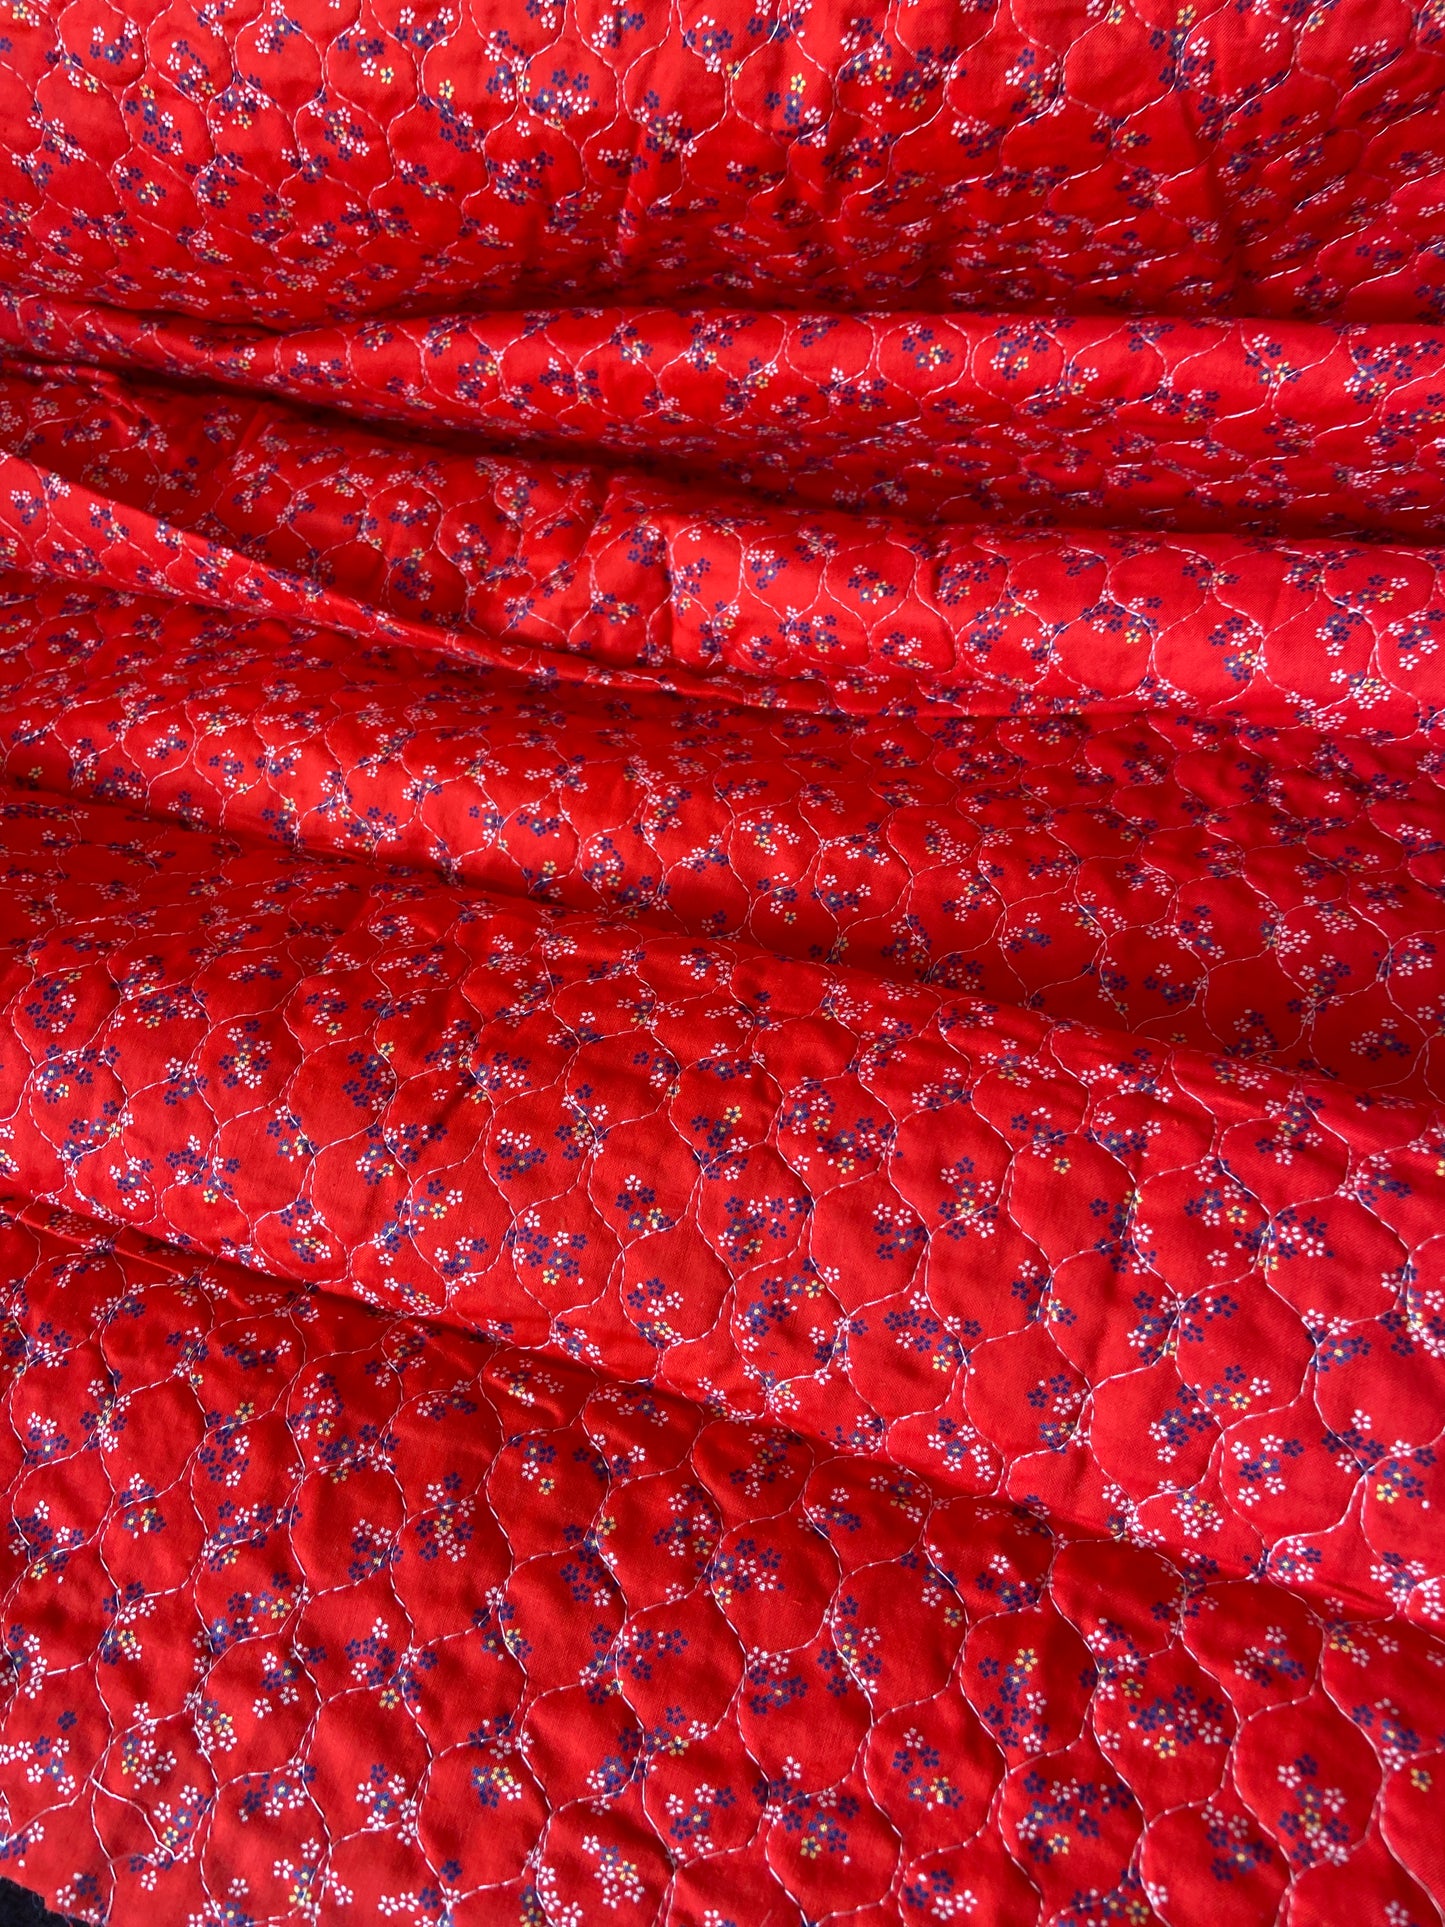 140cms Quilted Cotton Red Floral Fabric VINTAGE Sewing